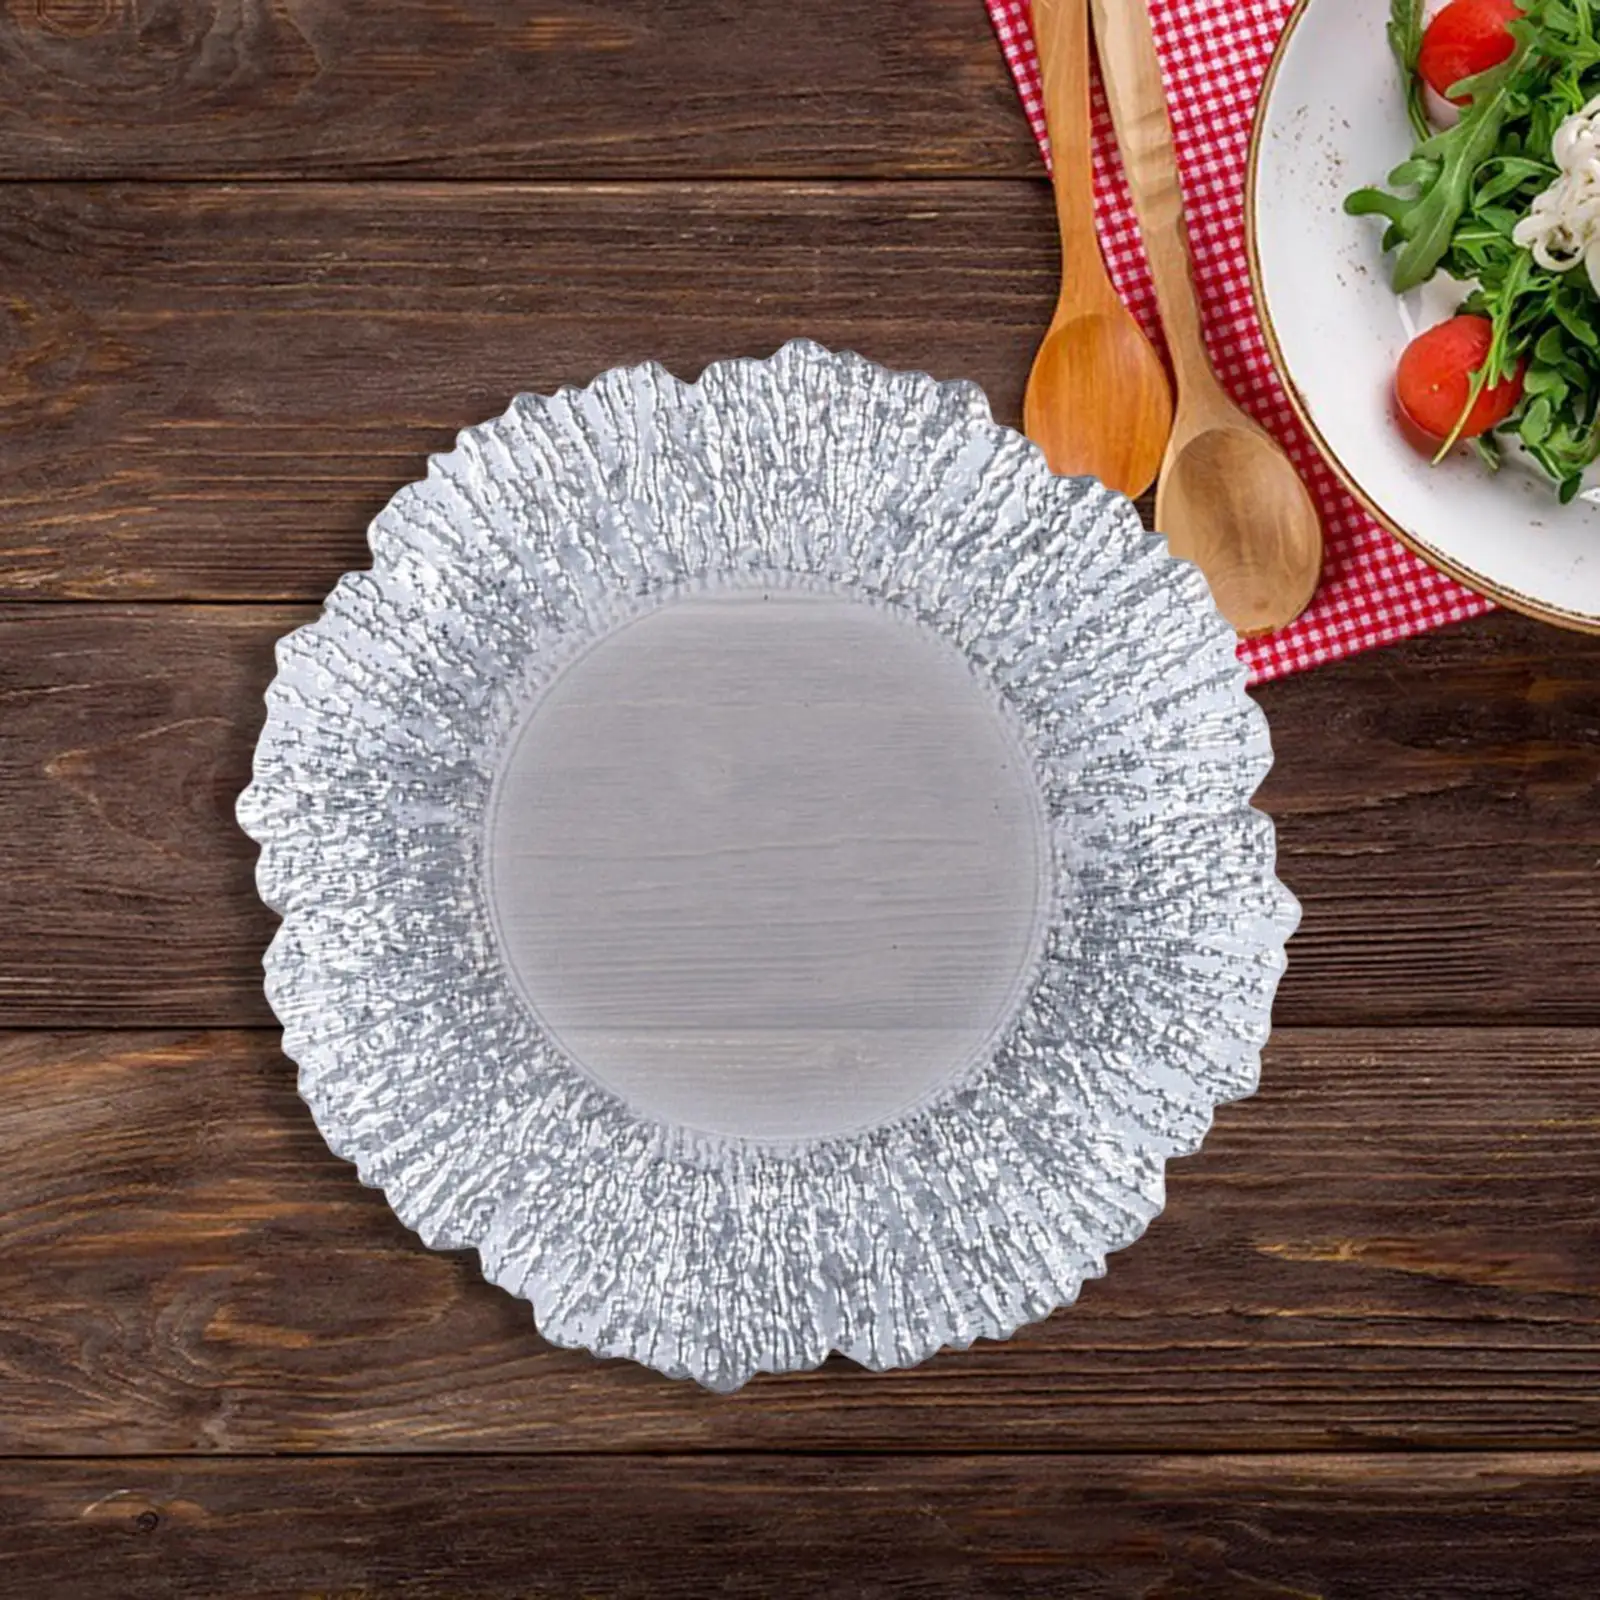 Service Platter Serving Tray Wedding Holiday Christmas Pans Baking Bowl Glass Round Dish for Pasta, Kitchen Tableware Country